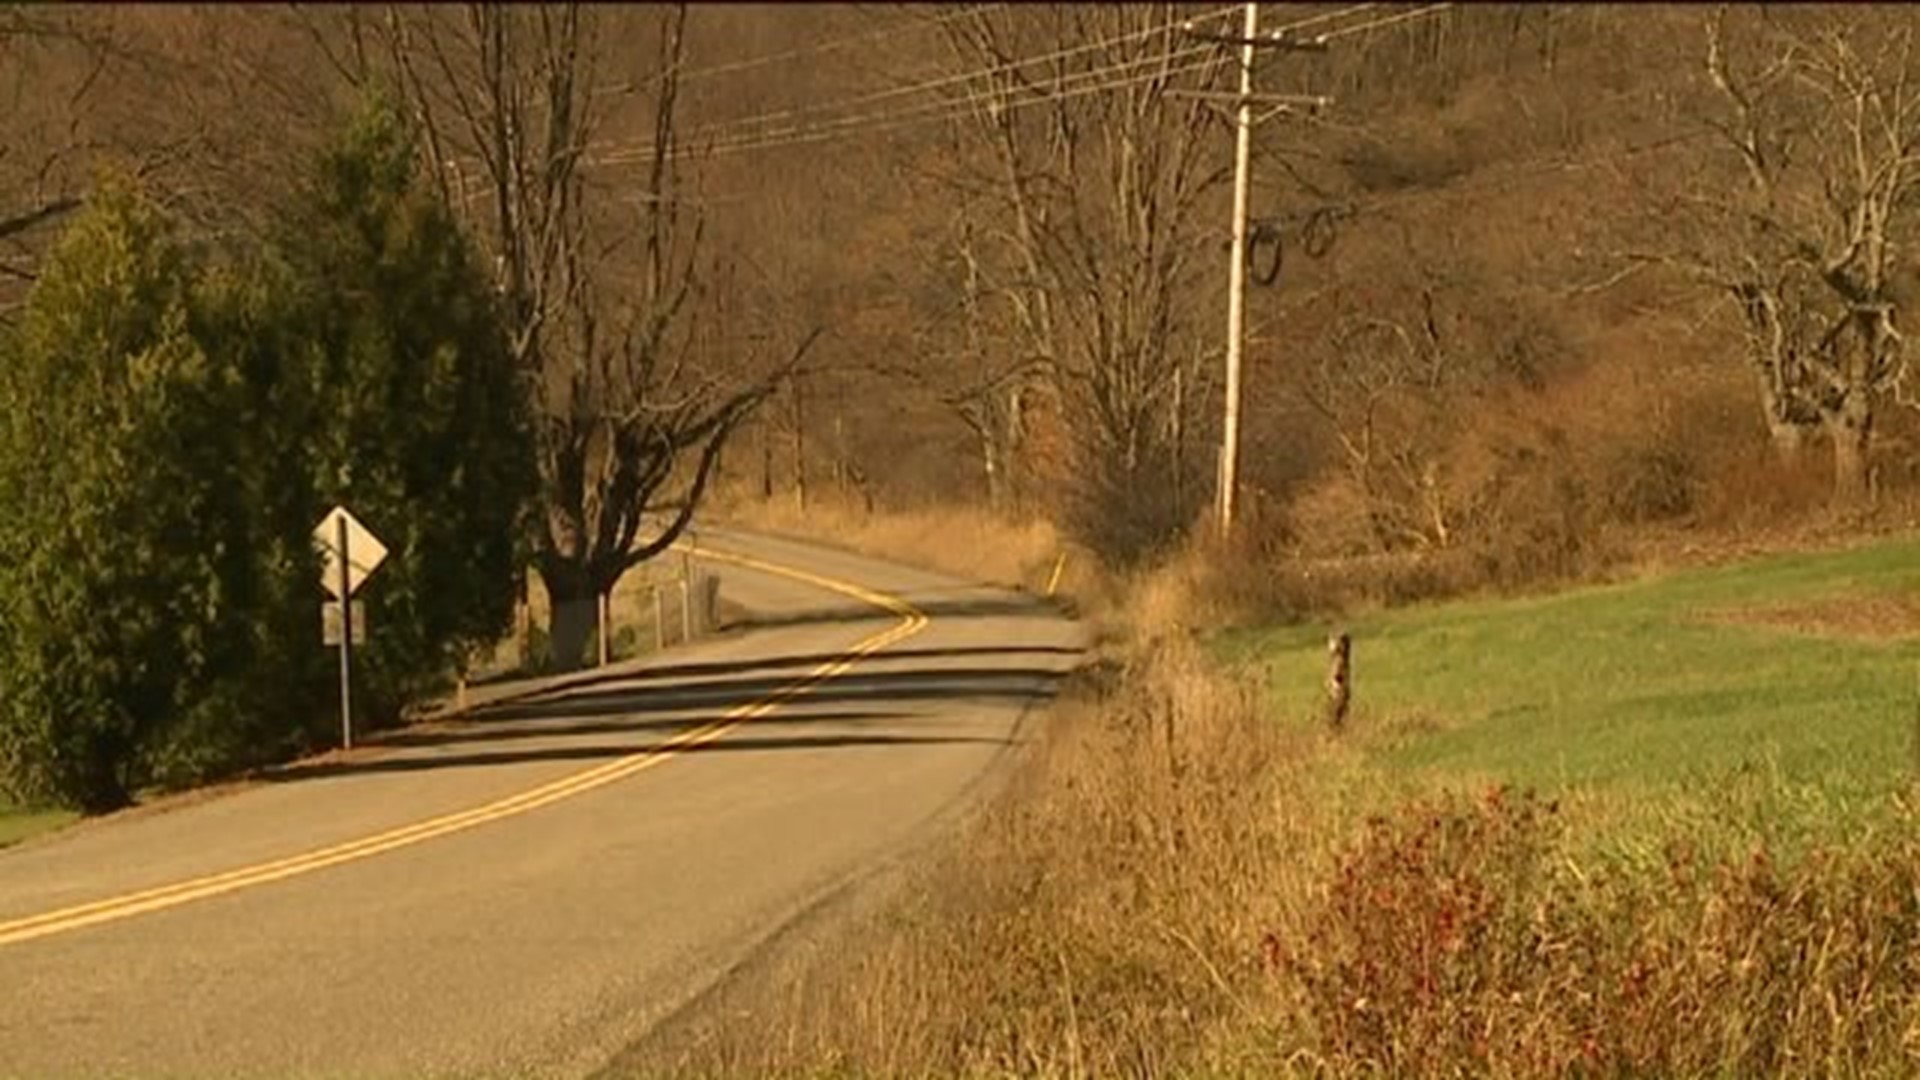 Police: Two Deaths in Murder-Suicide in Bradford County